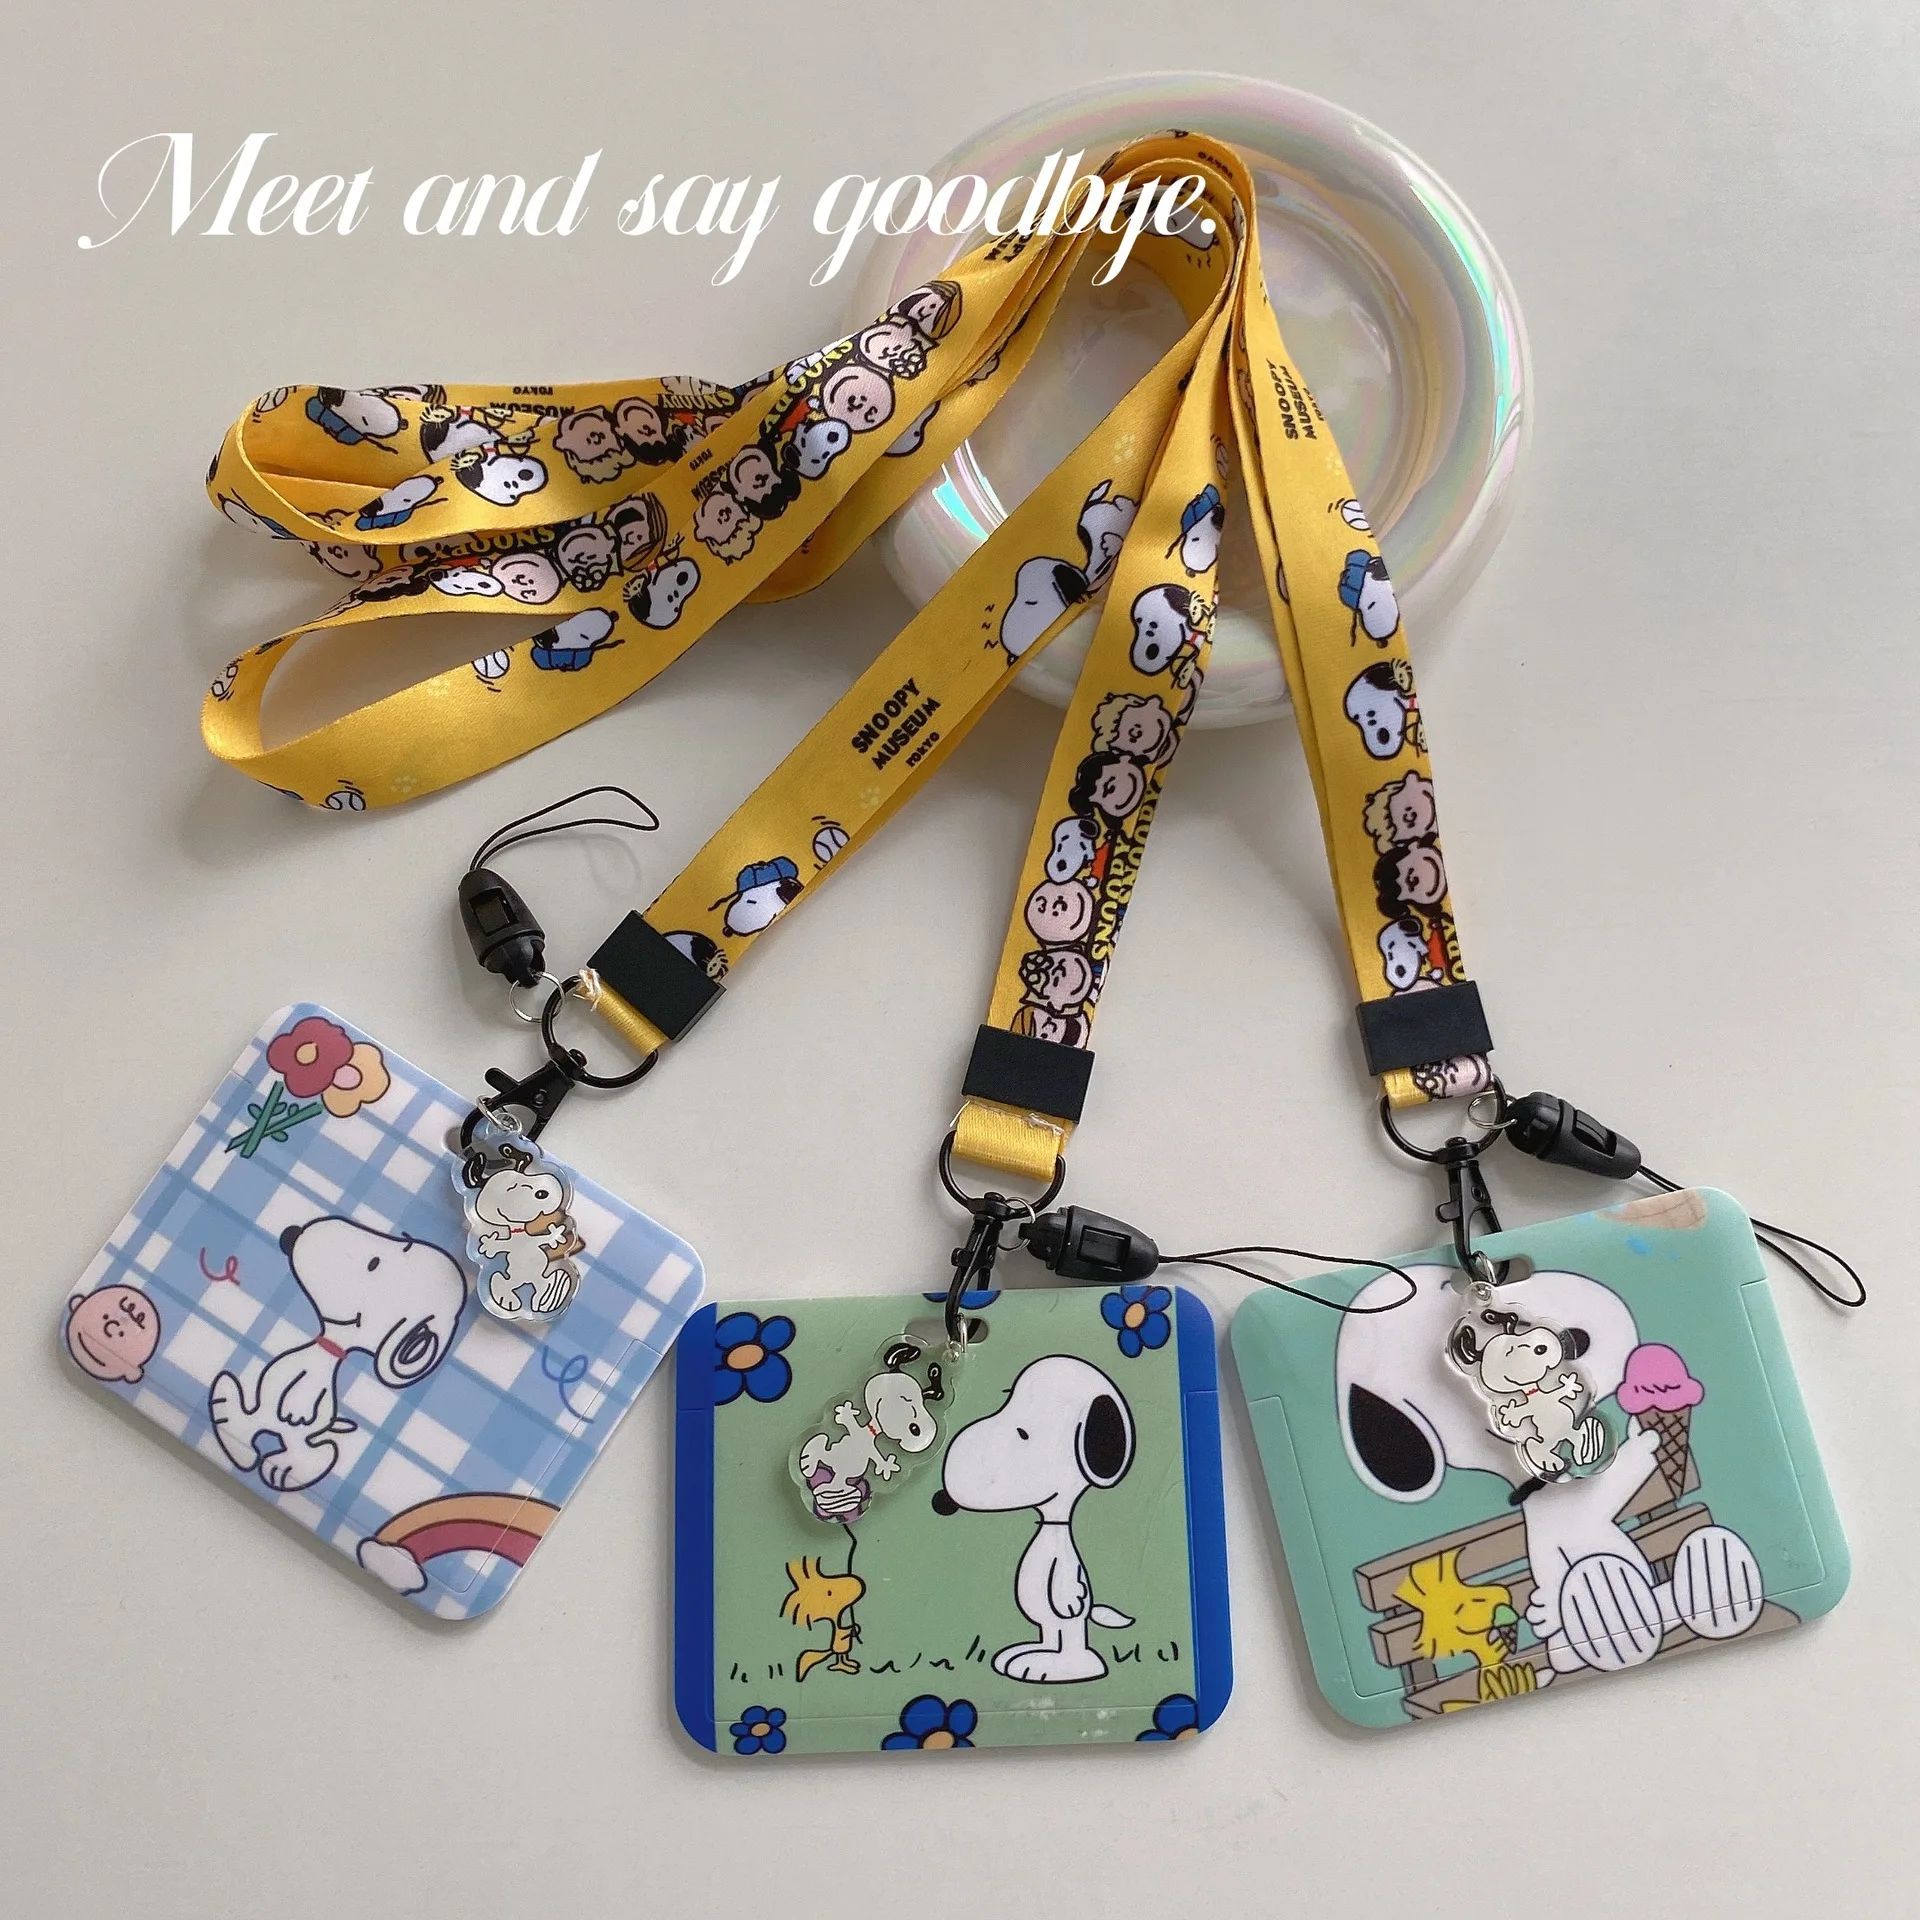 Snoopy on dog house badge holder with retractable reel